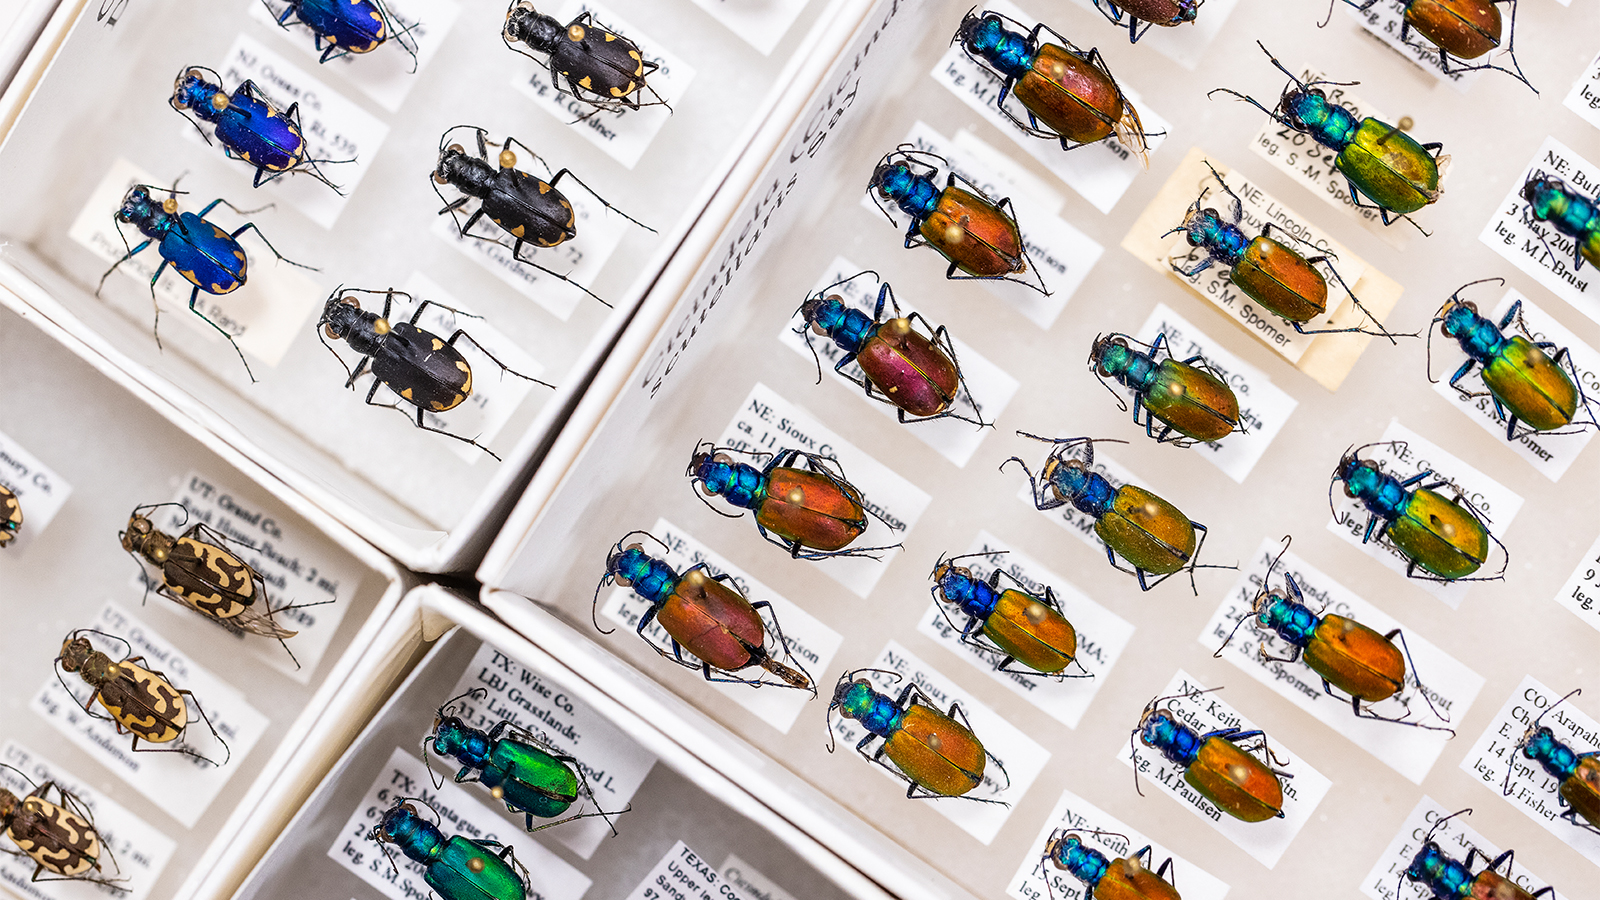 Close up of insect specimens